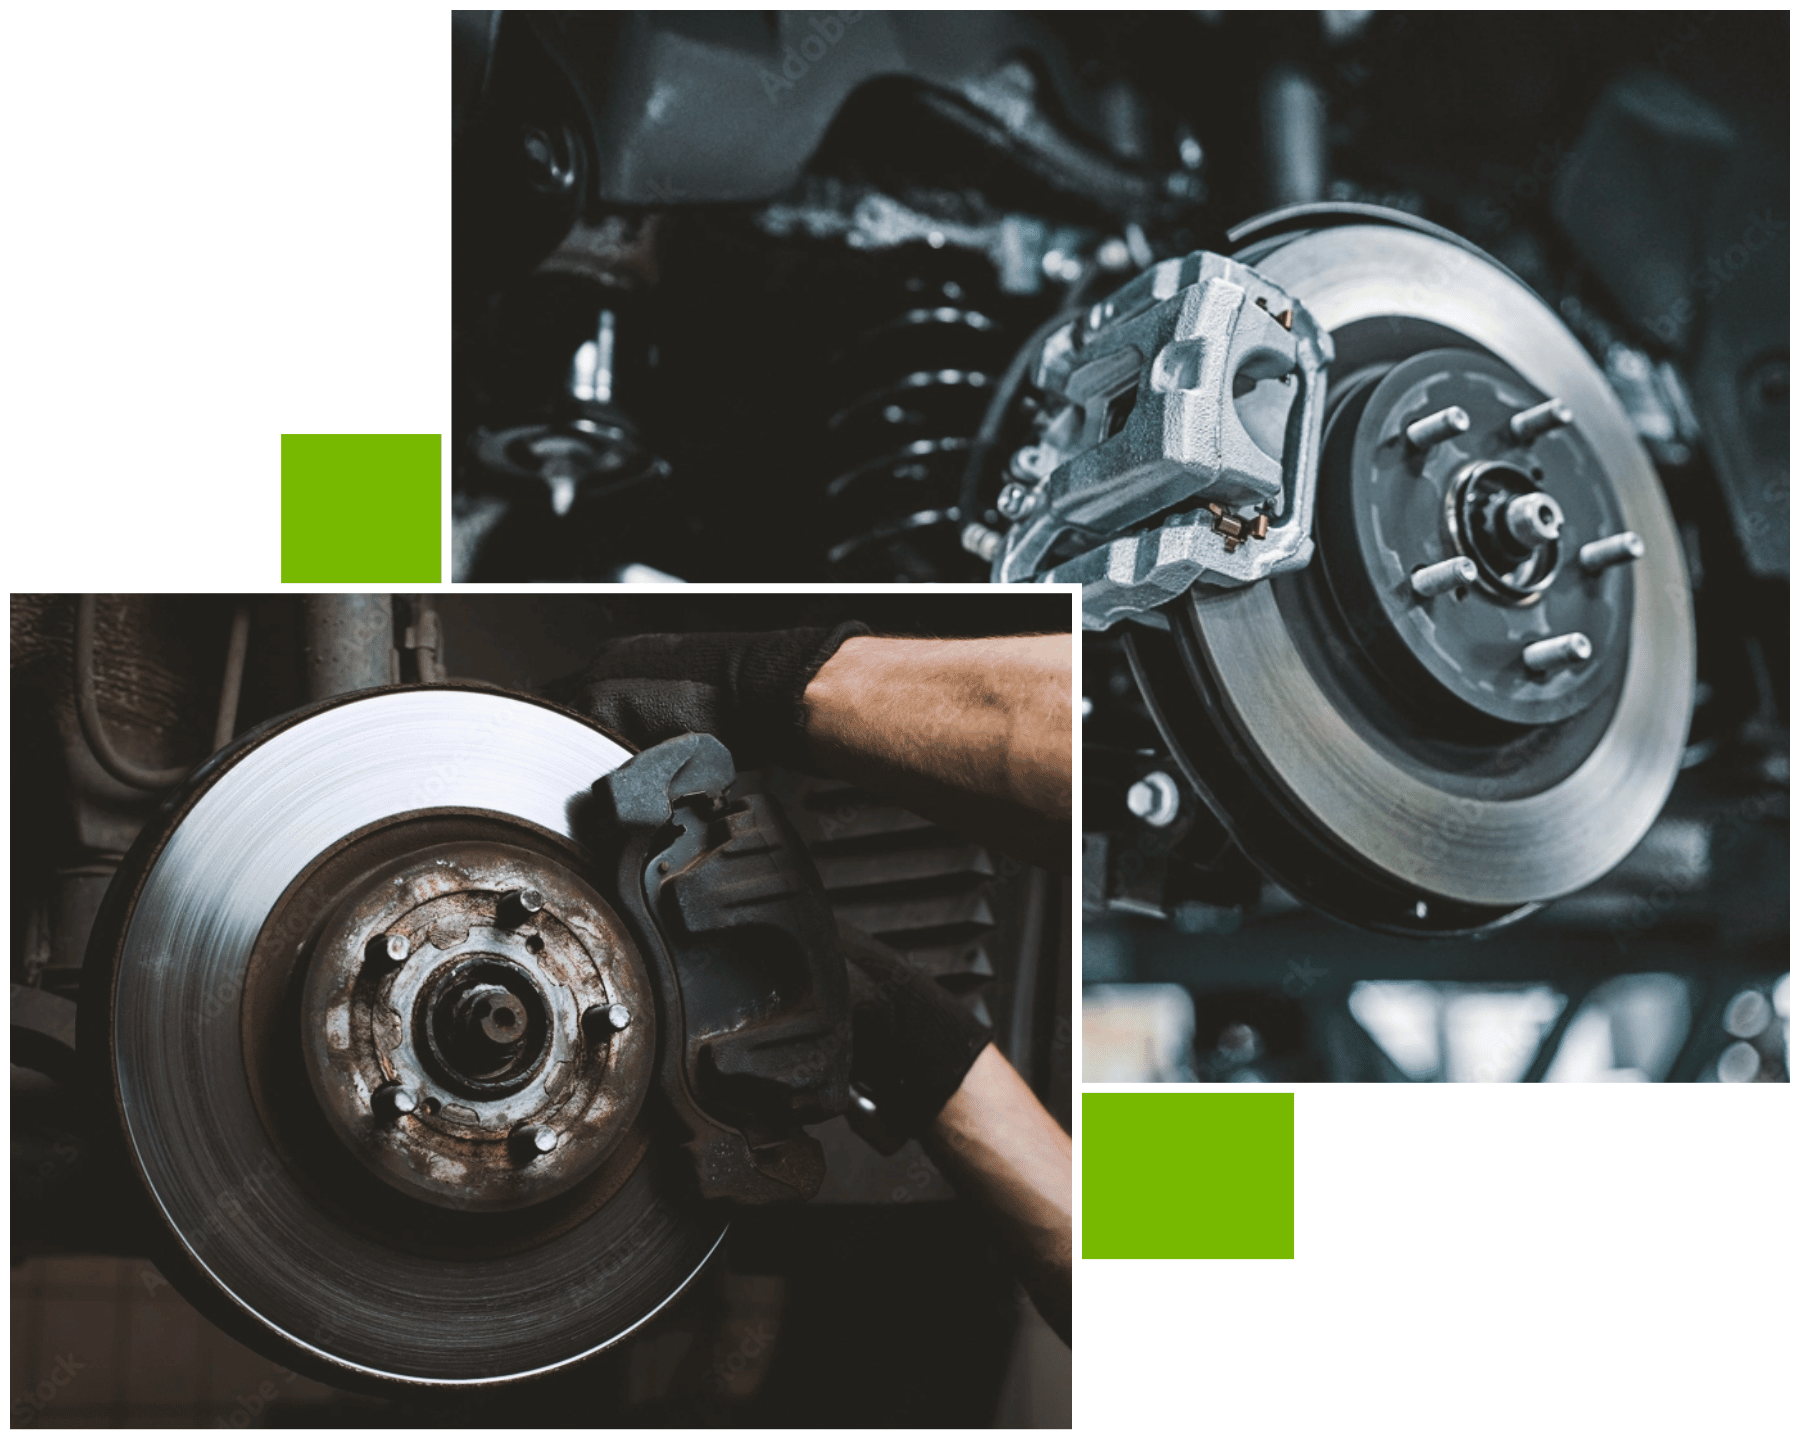 Two images of bare brakes. At the front image, image of a mechanic's hand at the act of repairing a car brake. At the back image is a brake showing components like rotor, pads, and calipers. Concept image of brake repair at Brittni's Automotive.